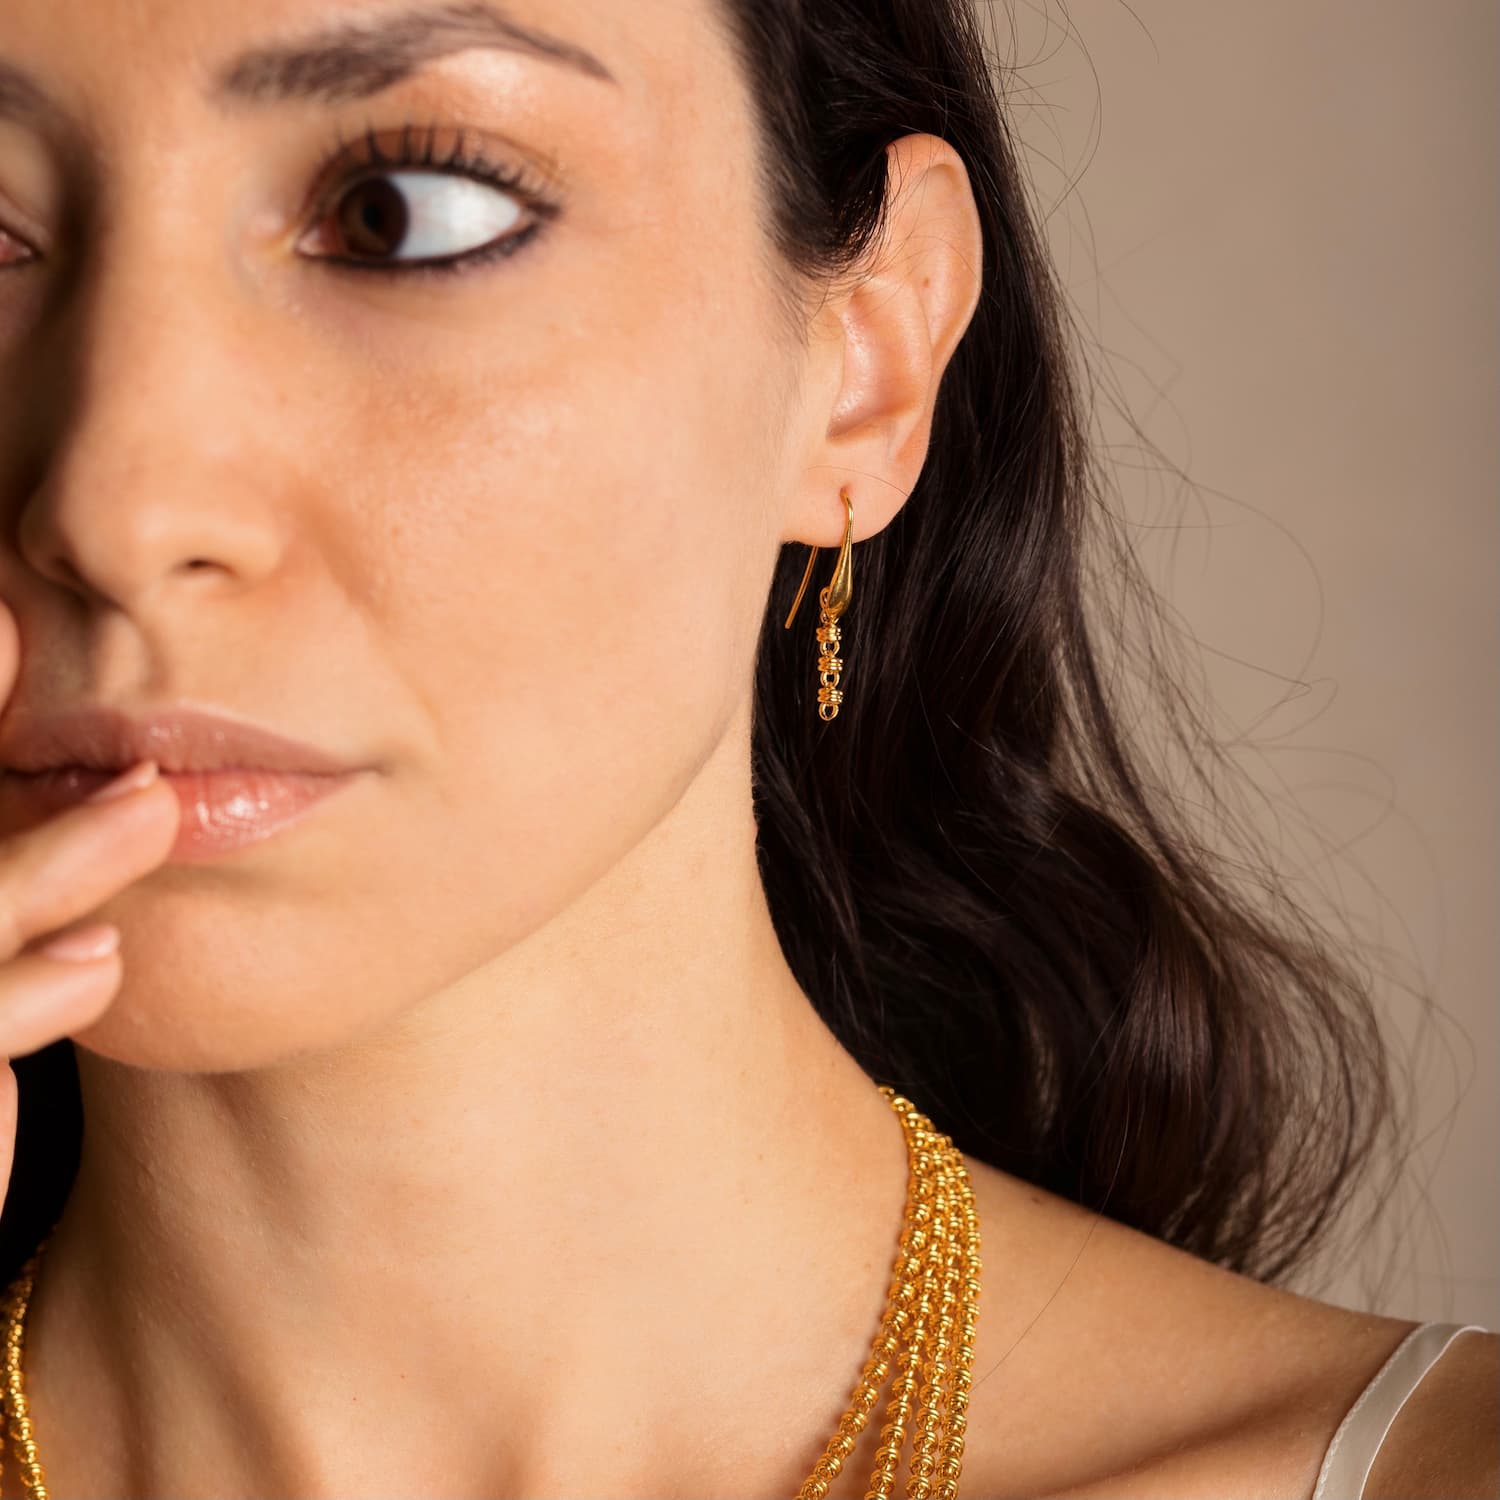 A model wearing four gold chains with matching gold chain earrings in the same iconic chain design around a semi-precious gemstone. All hand-crafted Italian jewelry is made by DelBrenna Italian Jewelers in Tuscany. 